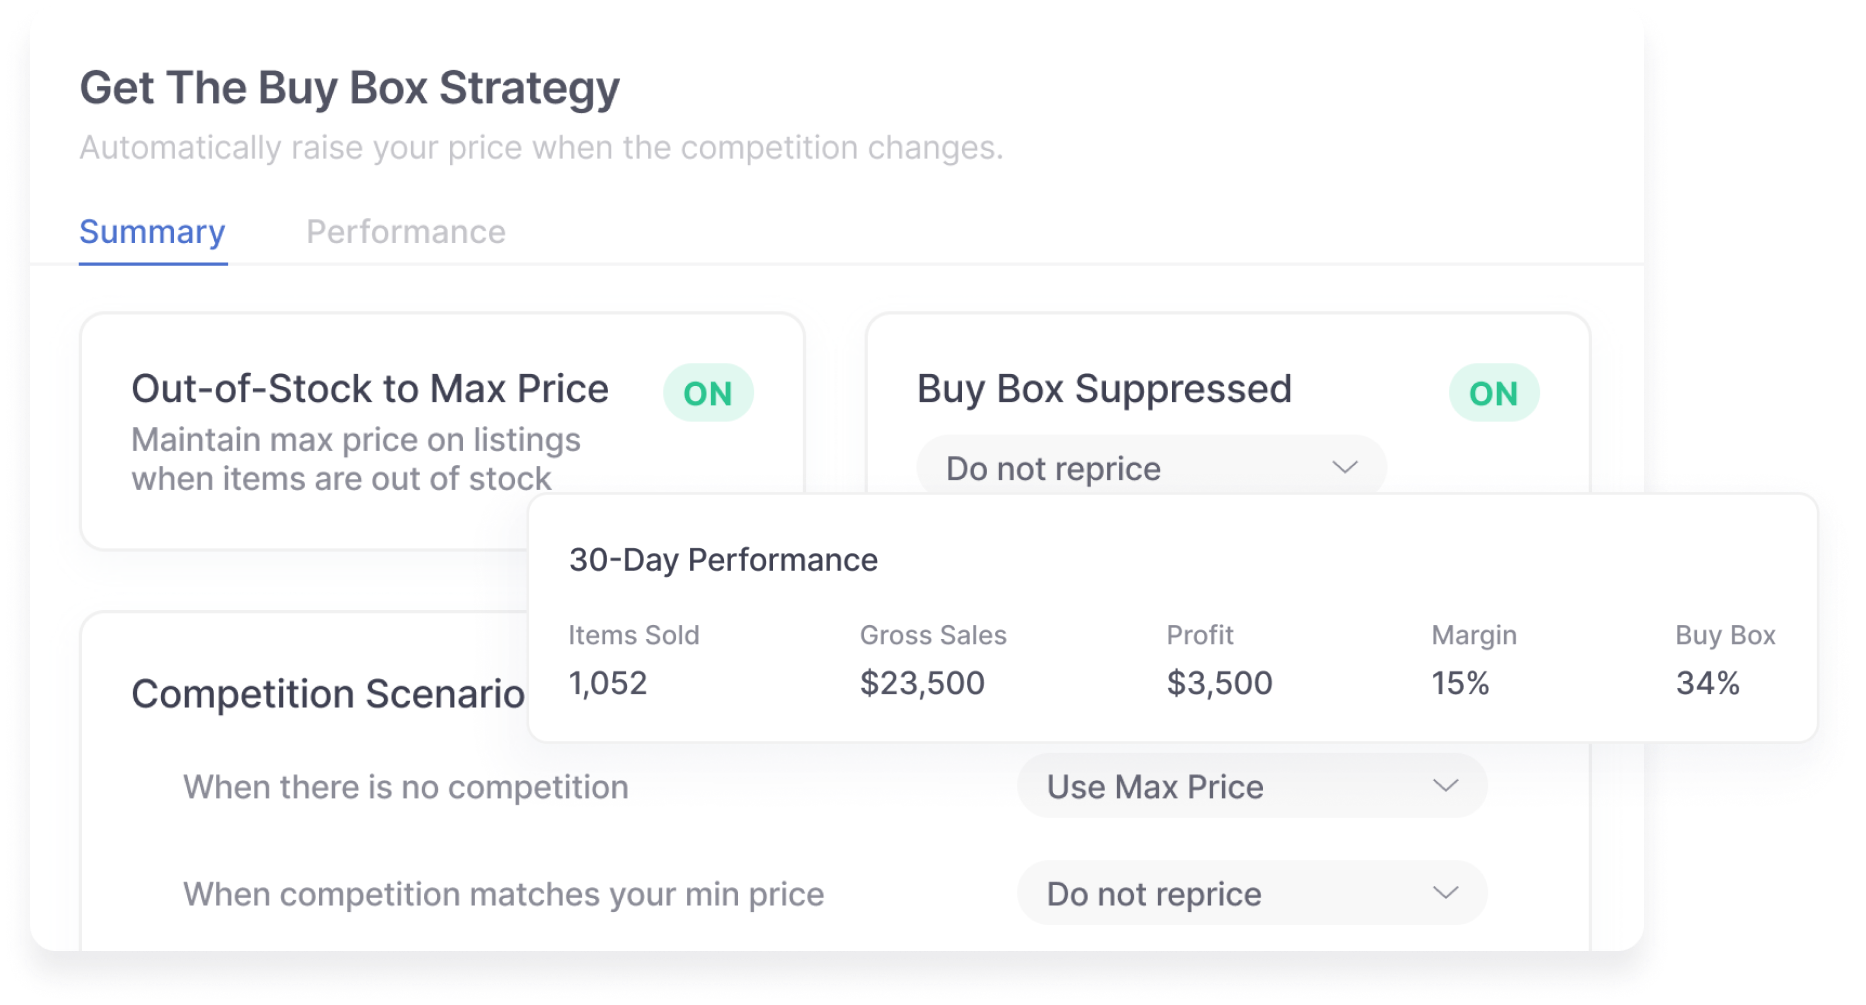 Create a pricing strategy to win the Buy Box and increase your profit margins